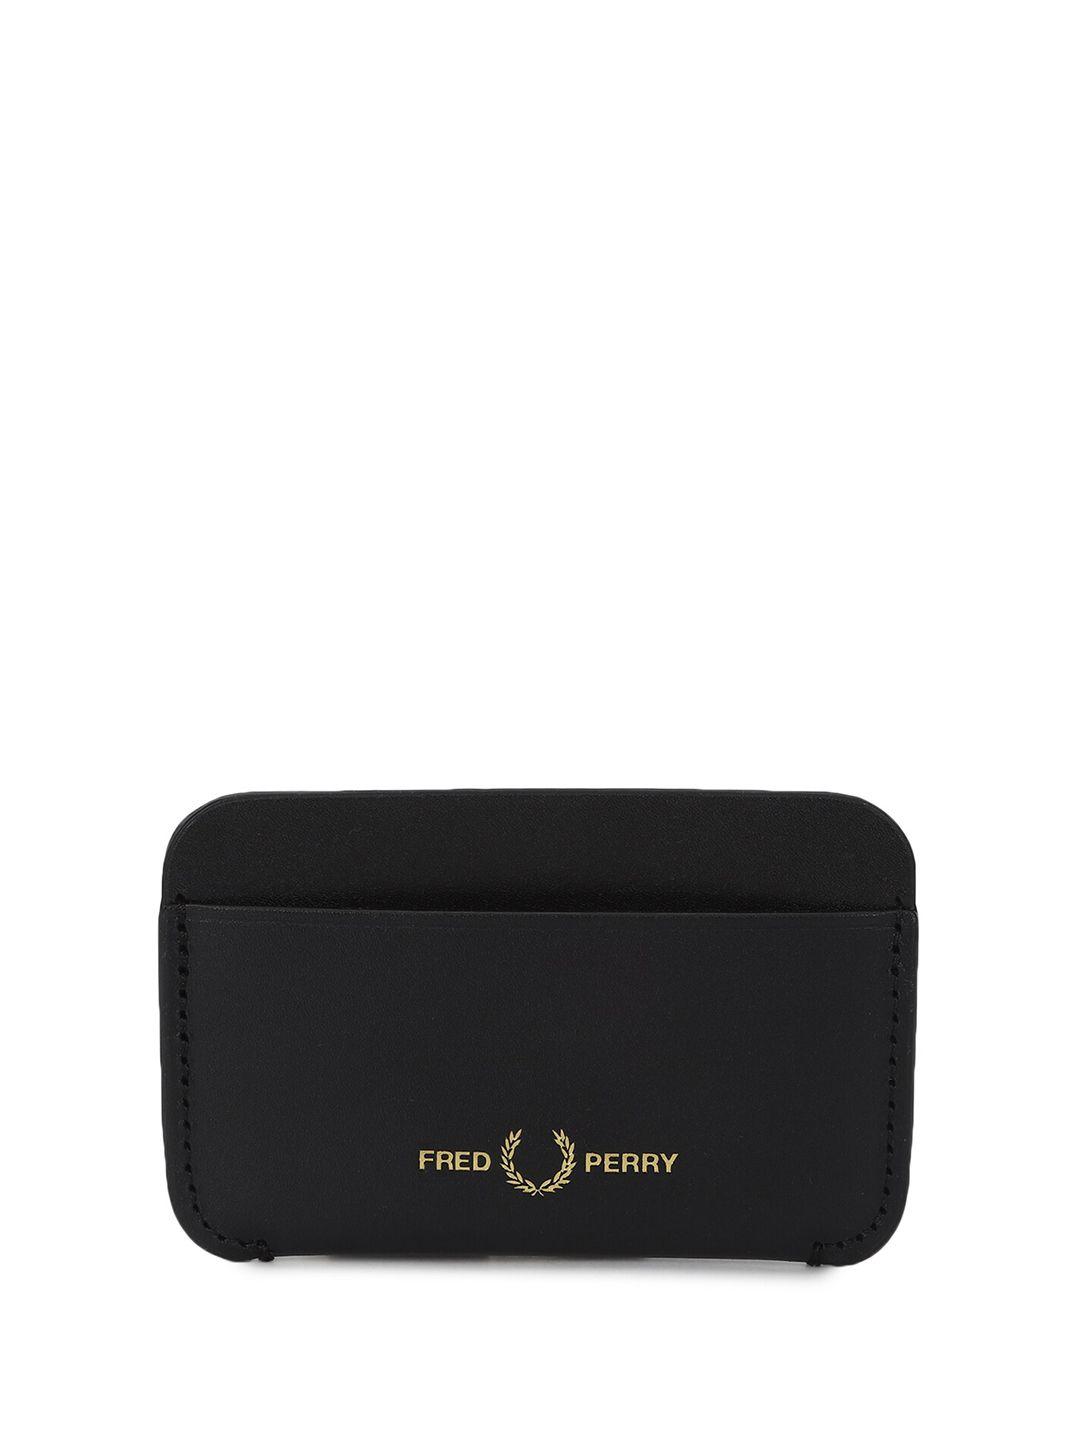 fred perry men textured leather card holder